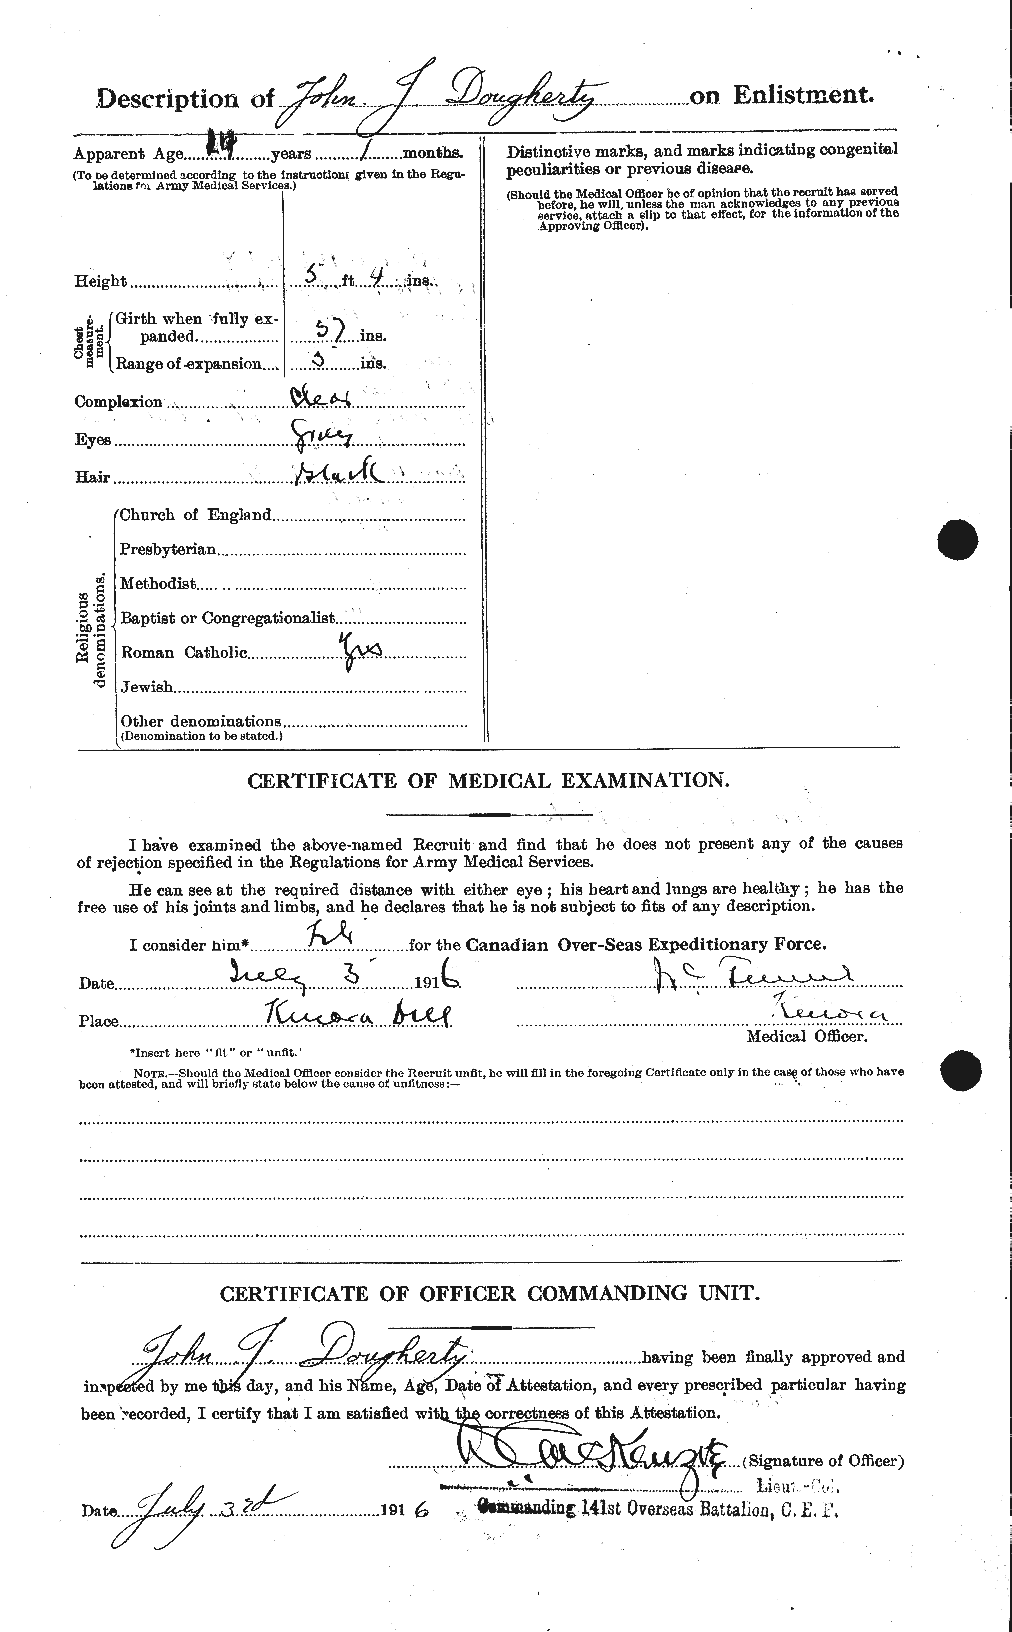 Personnel Records of the First World War - CEF 296153b